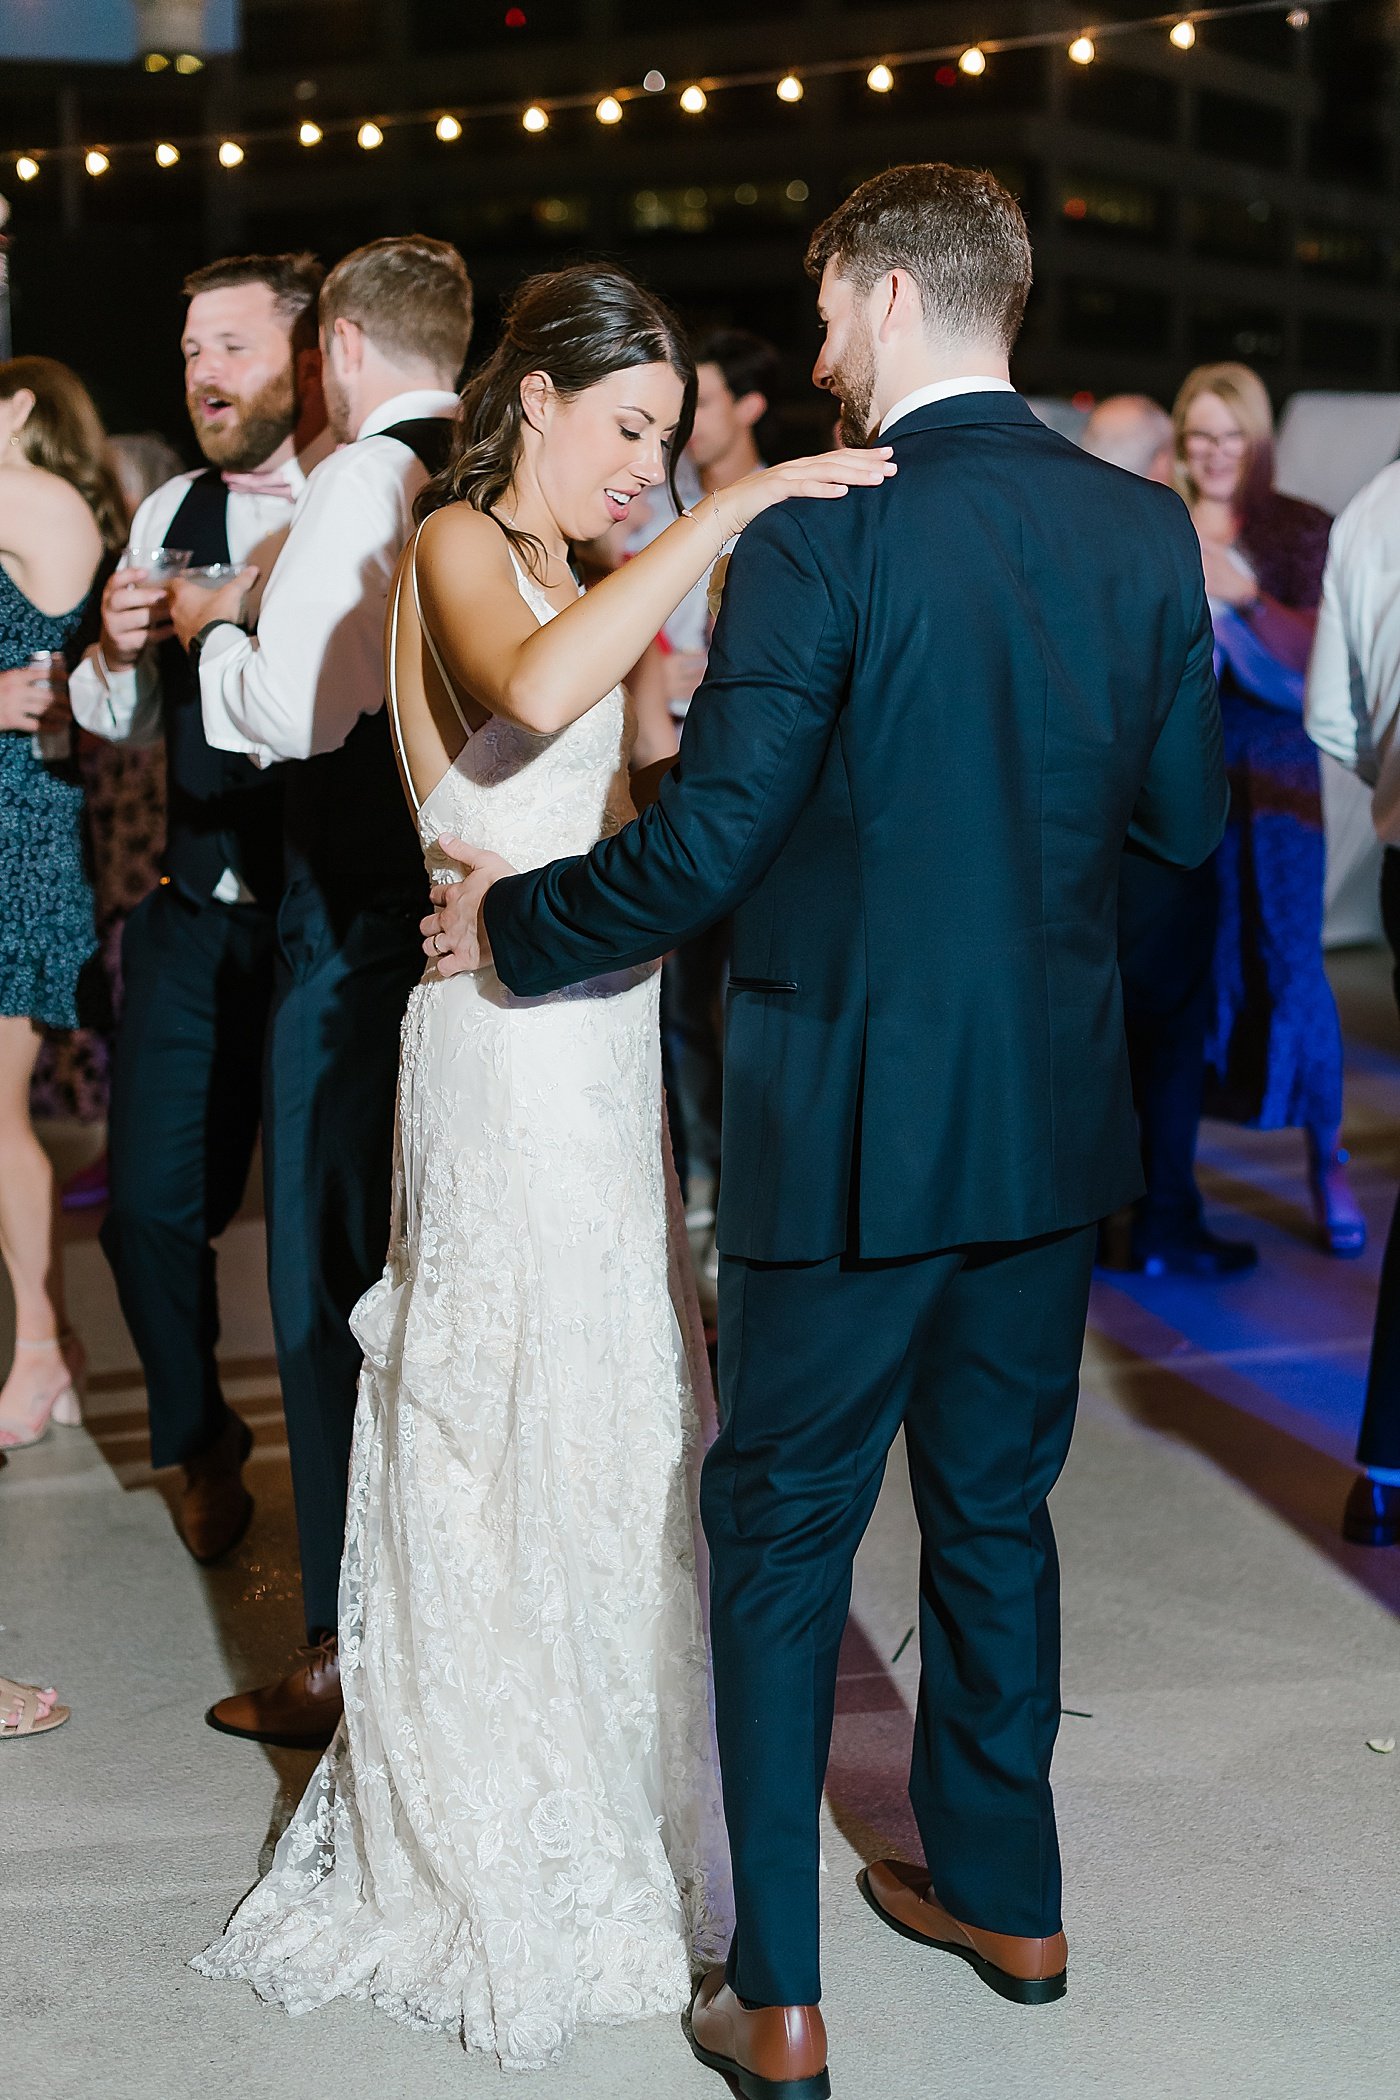 Rebecca Shehorn Photography Mary and Clint's Regions Tower Wedding-952.jpg